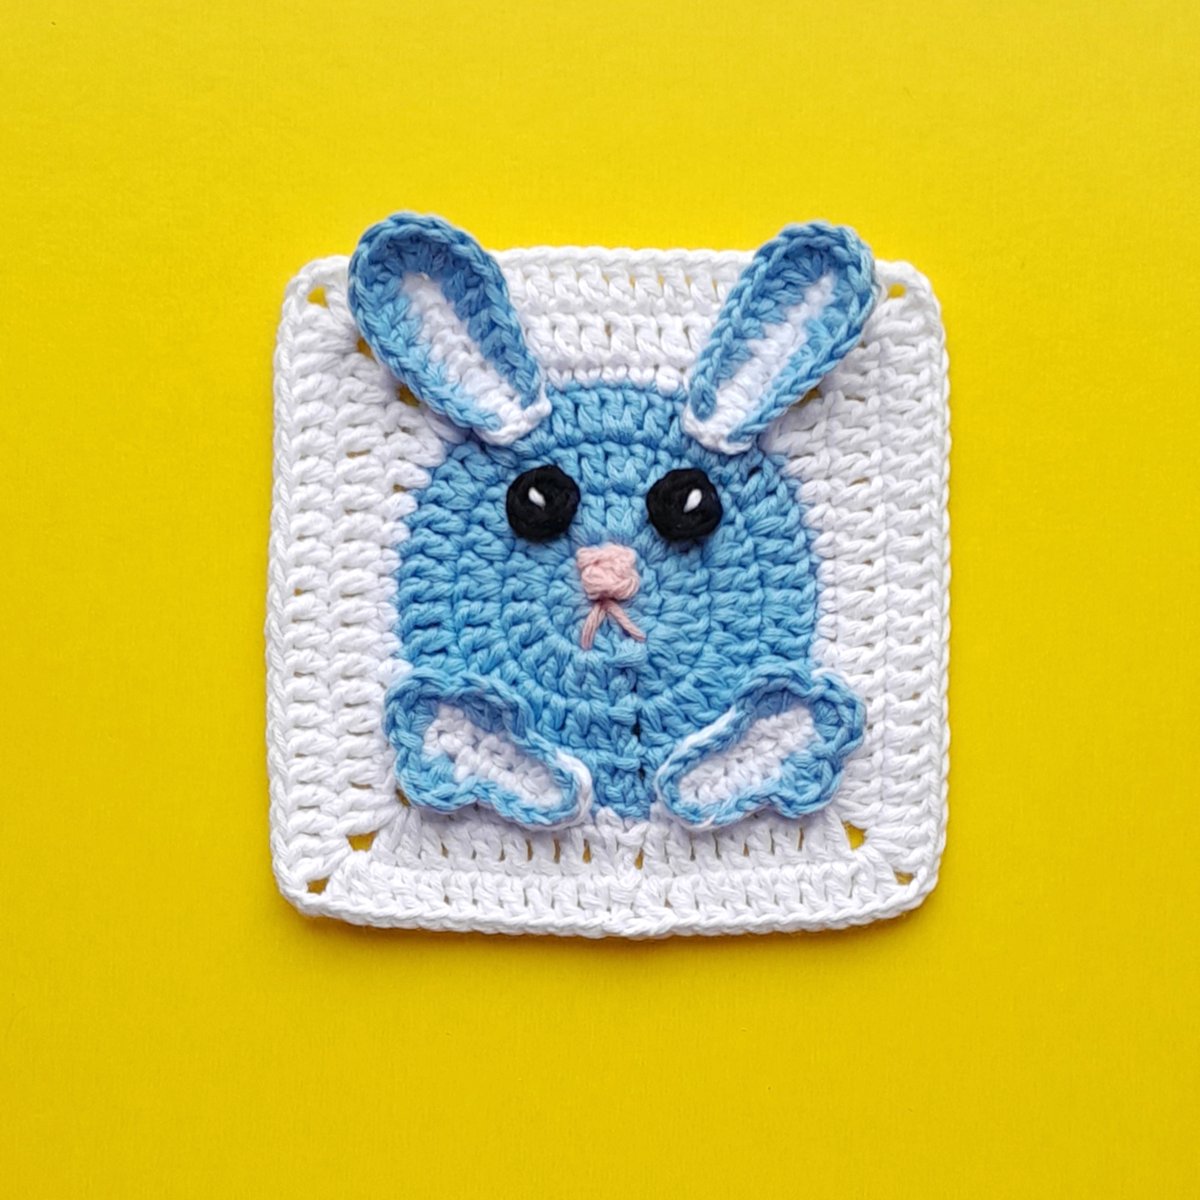 Easter Granny Square Bunny Pattern, Granny Square Rabbit Pattern
ravelry.com/patterns/libra…

#Ravelry #crochet #GrannySquarePattern #crochetpattern #grannysquare #crocheter #crocheting #crochetideas #handmade #craft #idea #giftidea #gift #gifts